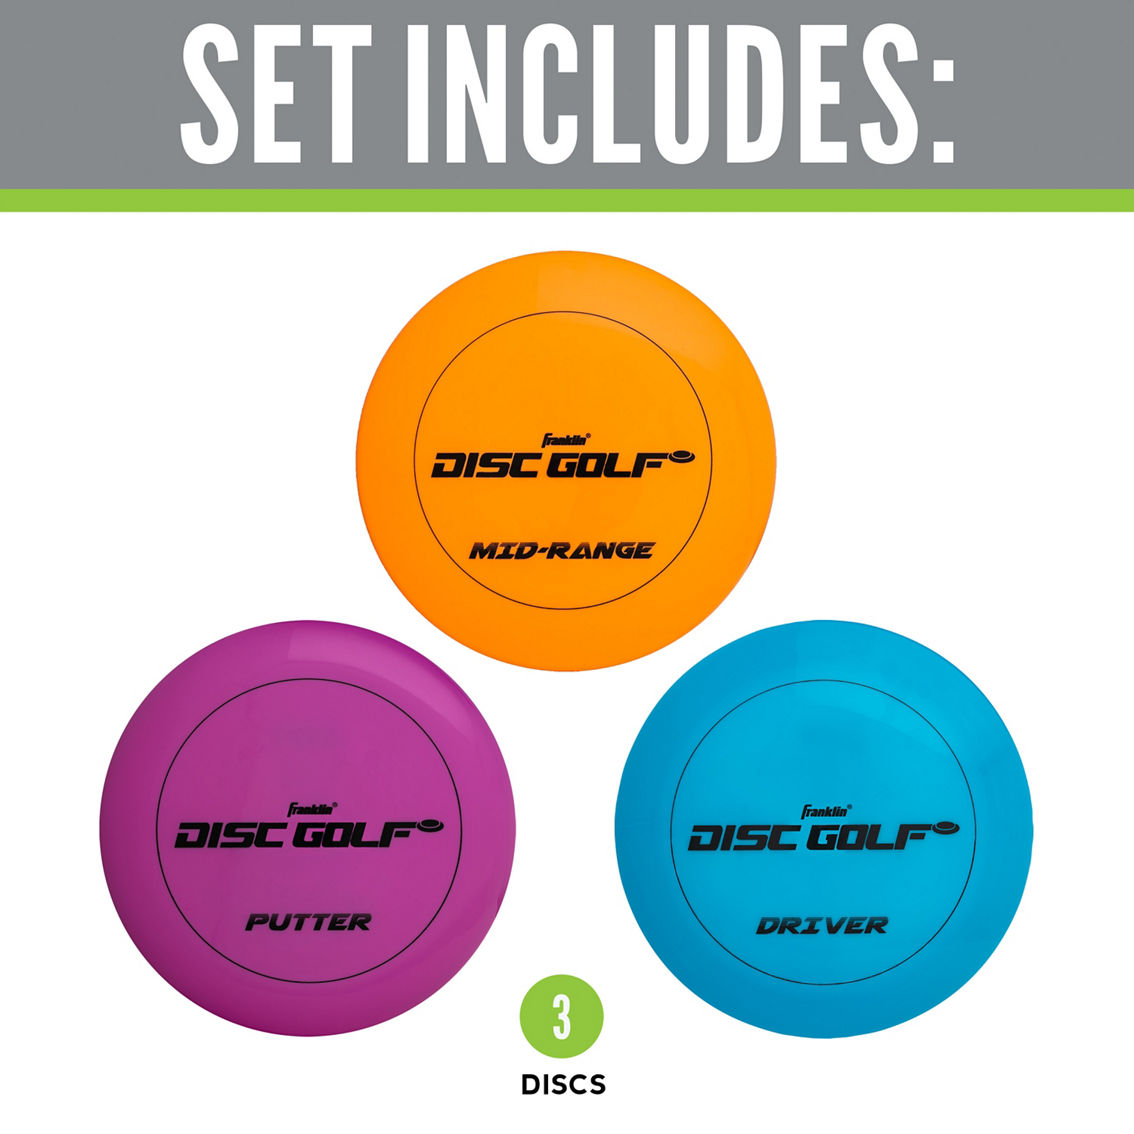 Franklin Disc Golf 3 pc. Set with Putter, Mid Range and Driver Discs - Image 2 of 9